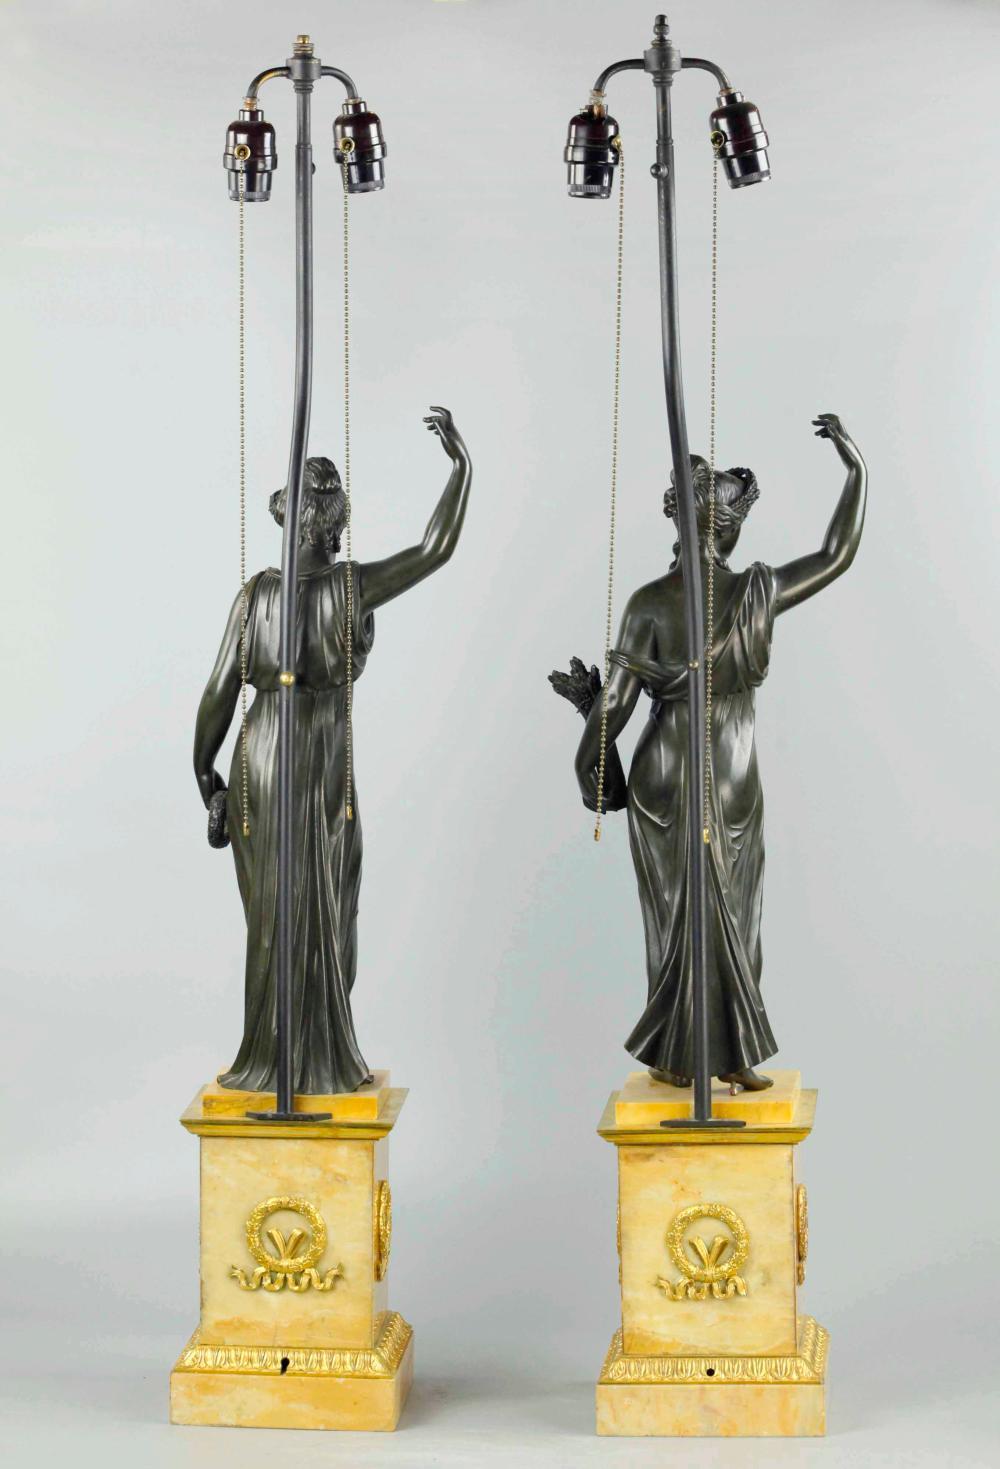 Pair of 19th century Russian patinated bronze neoclassical figures on Siena marble plinths. Now as lamps. Intricately cast and well gilded ormolu mounts. Two of the four seasons. Grand scale

Measures: Overall lamp height: 42